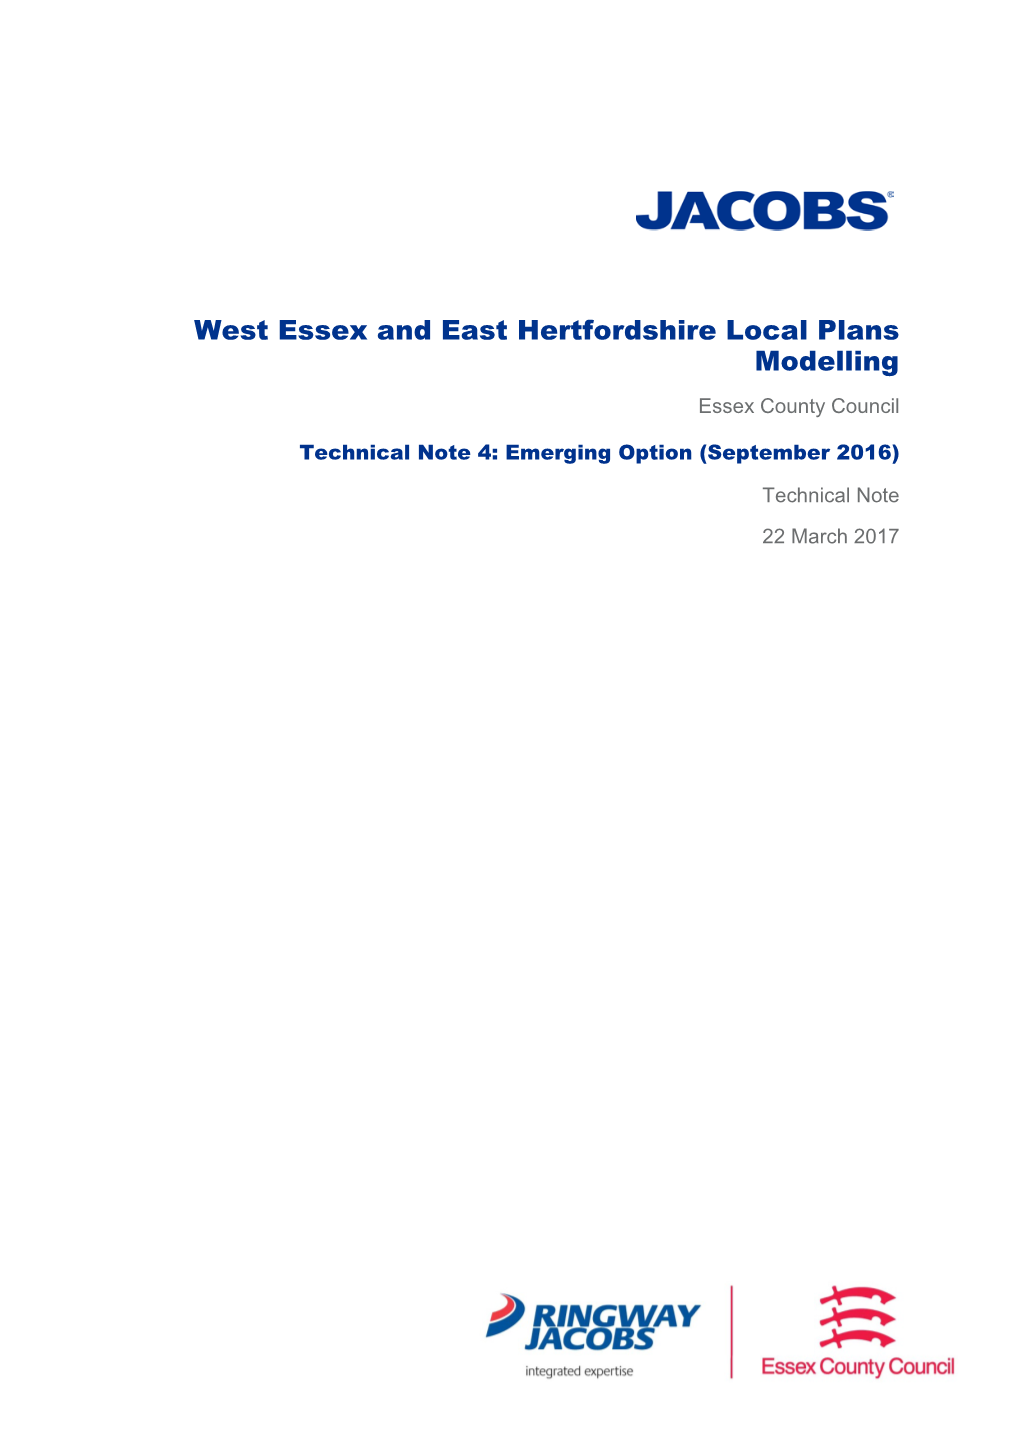 West Essex and East Hertfordshire Local Plans Modelling Essex County Council